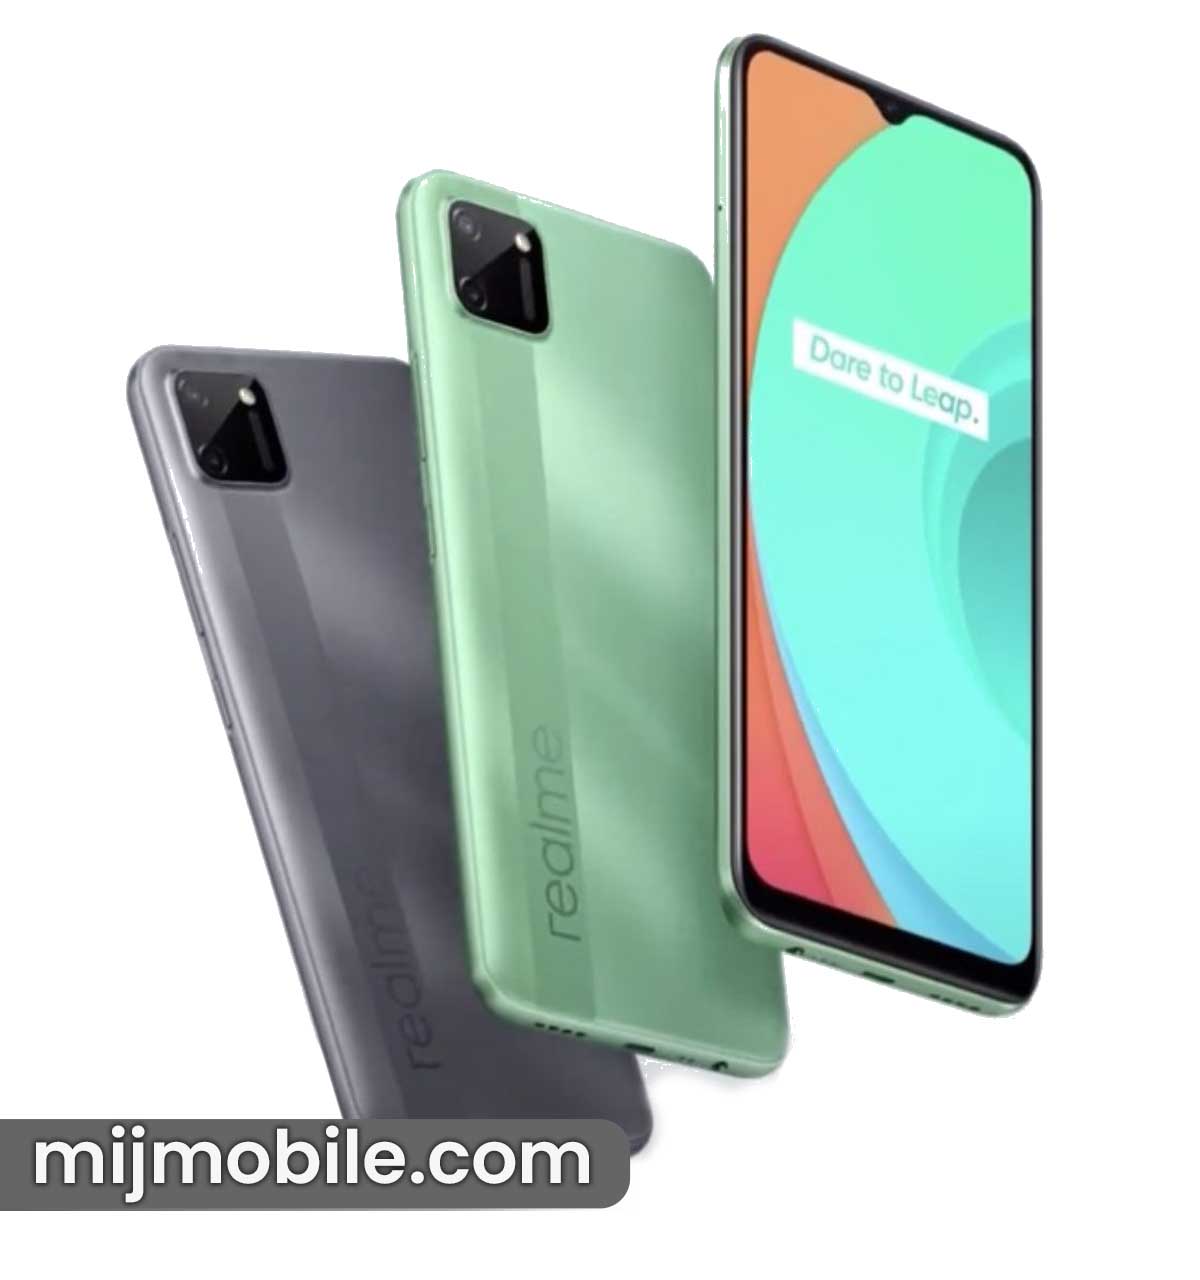 Realme C11 Price in Pakistan & Specifications Realme C11 Price in Pakistan is only 19,299.